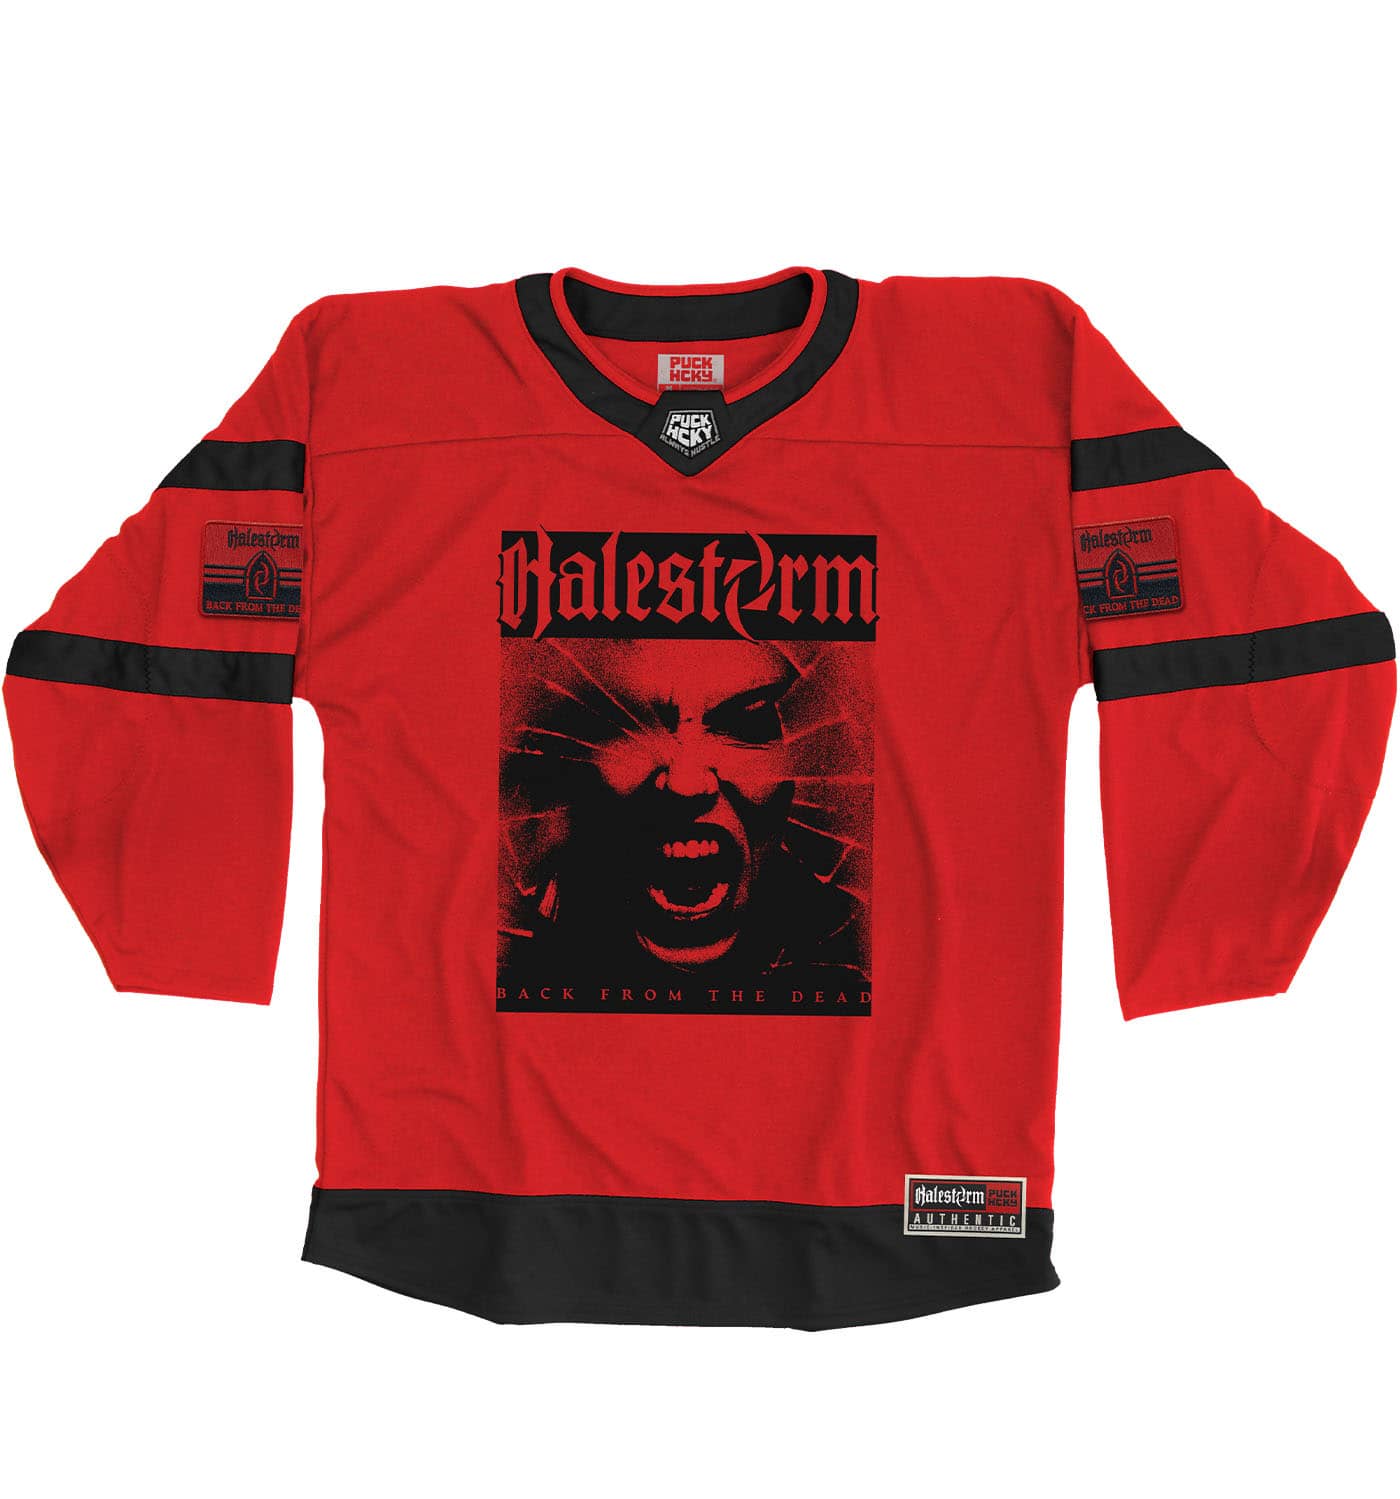 HALESTORM ‘BACK FROM THE DEAD’ hockey jersey in red and black front view